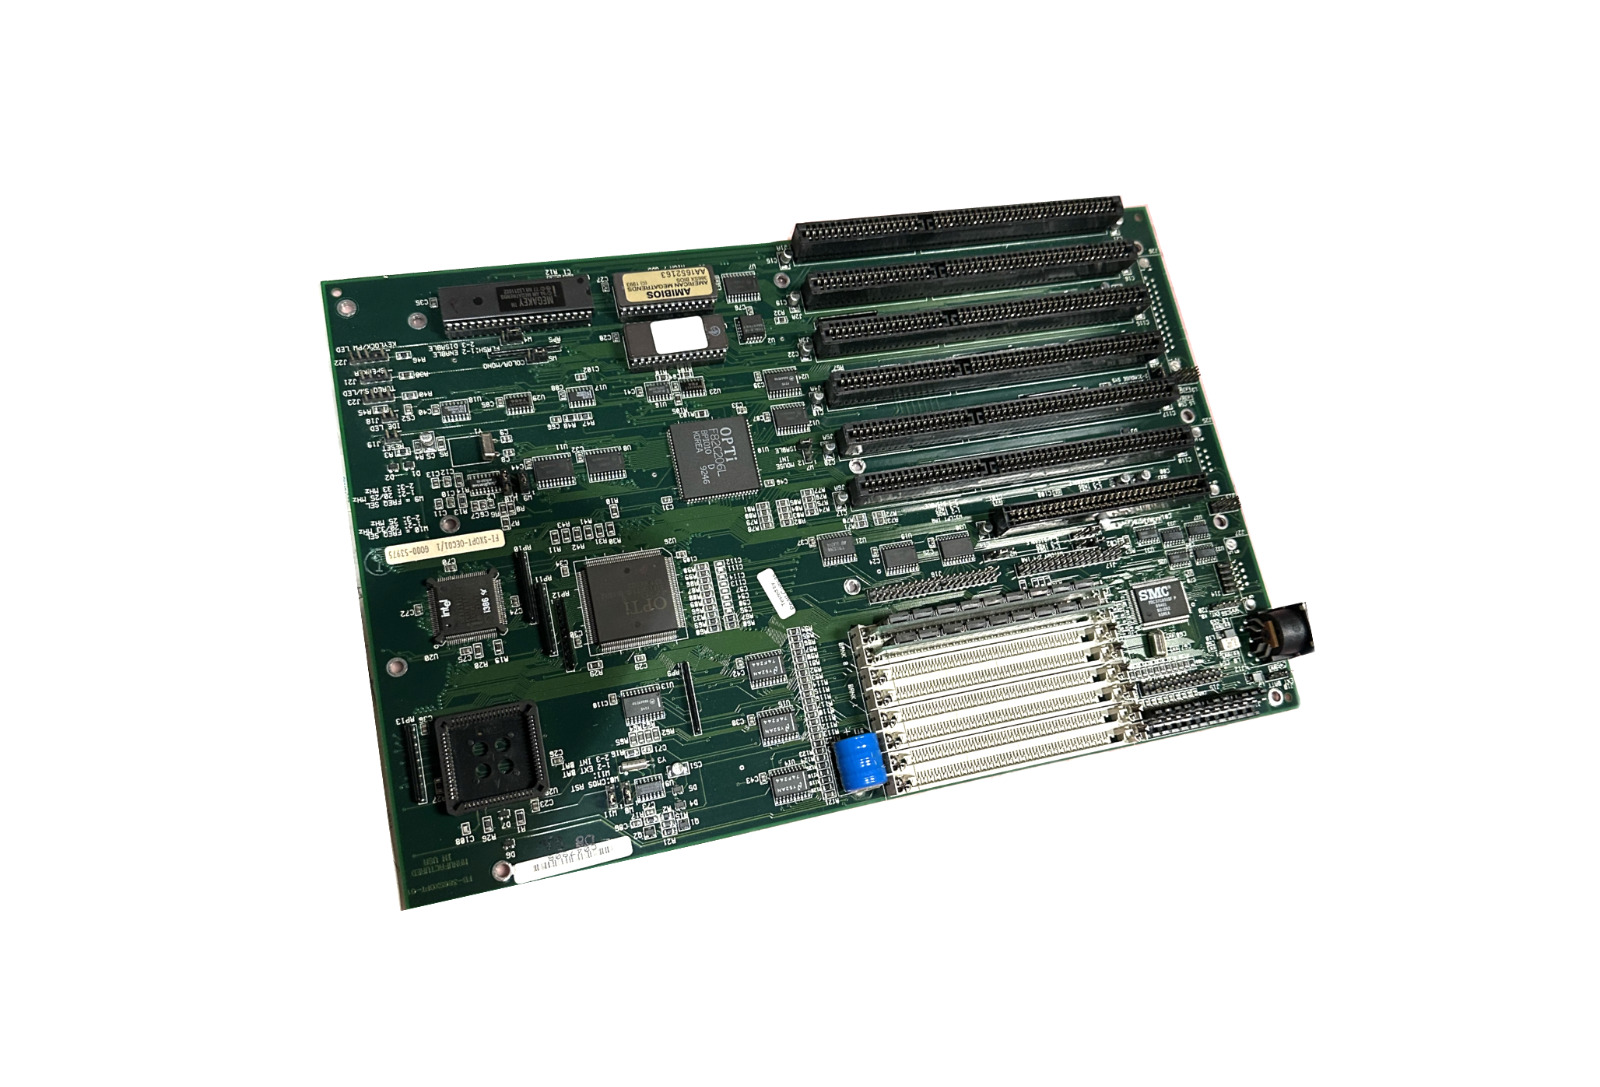 00-900658-01 Workstation Motherboard for an OEC 9600 X-Ray C-Arm System